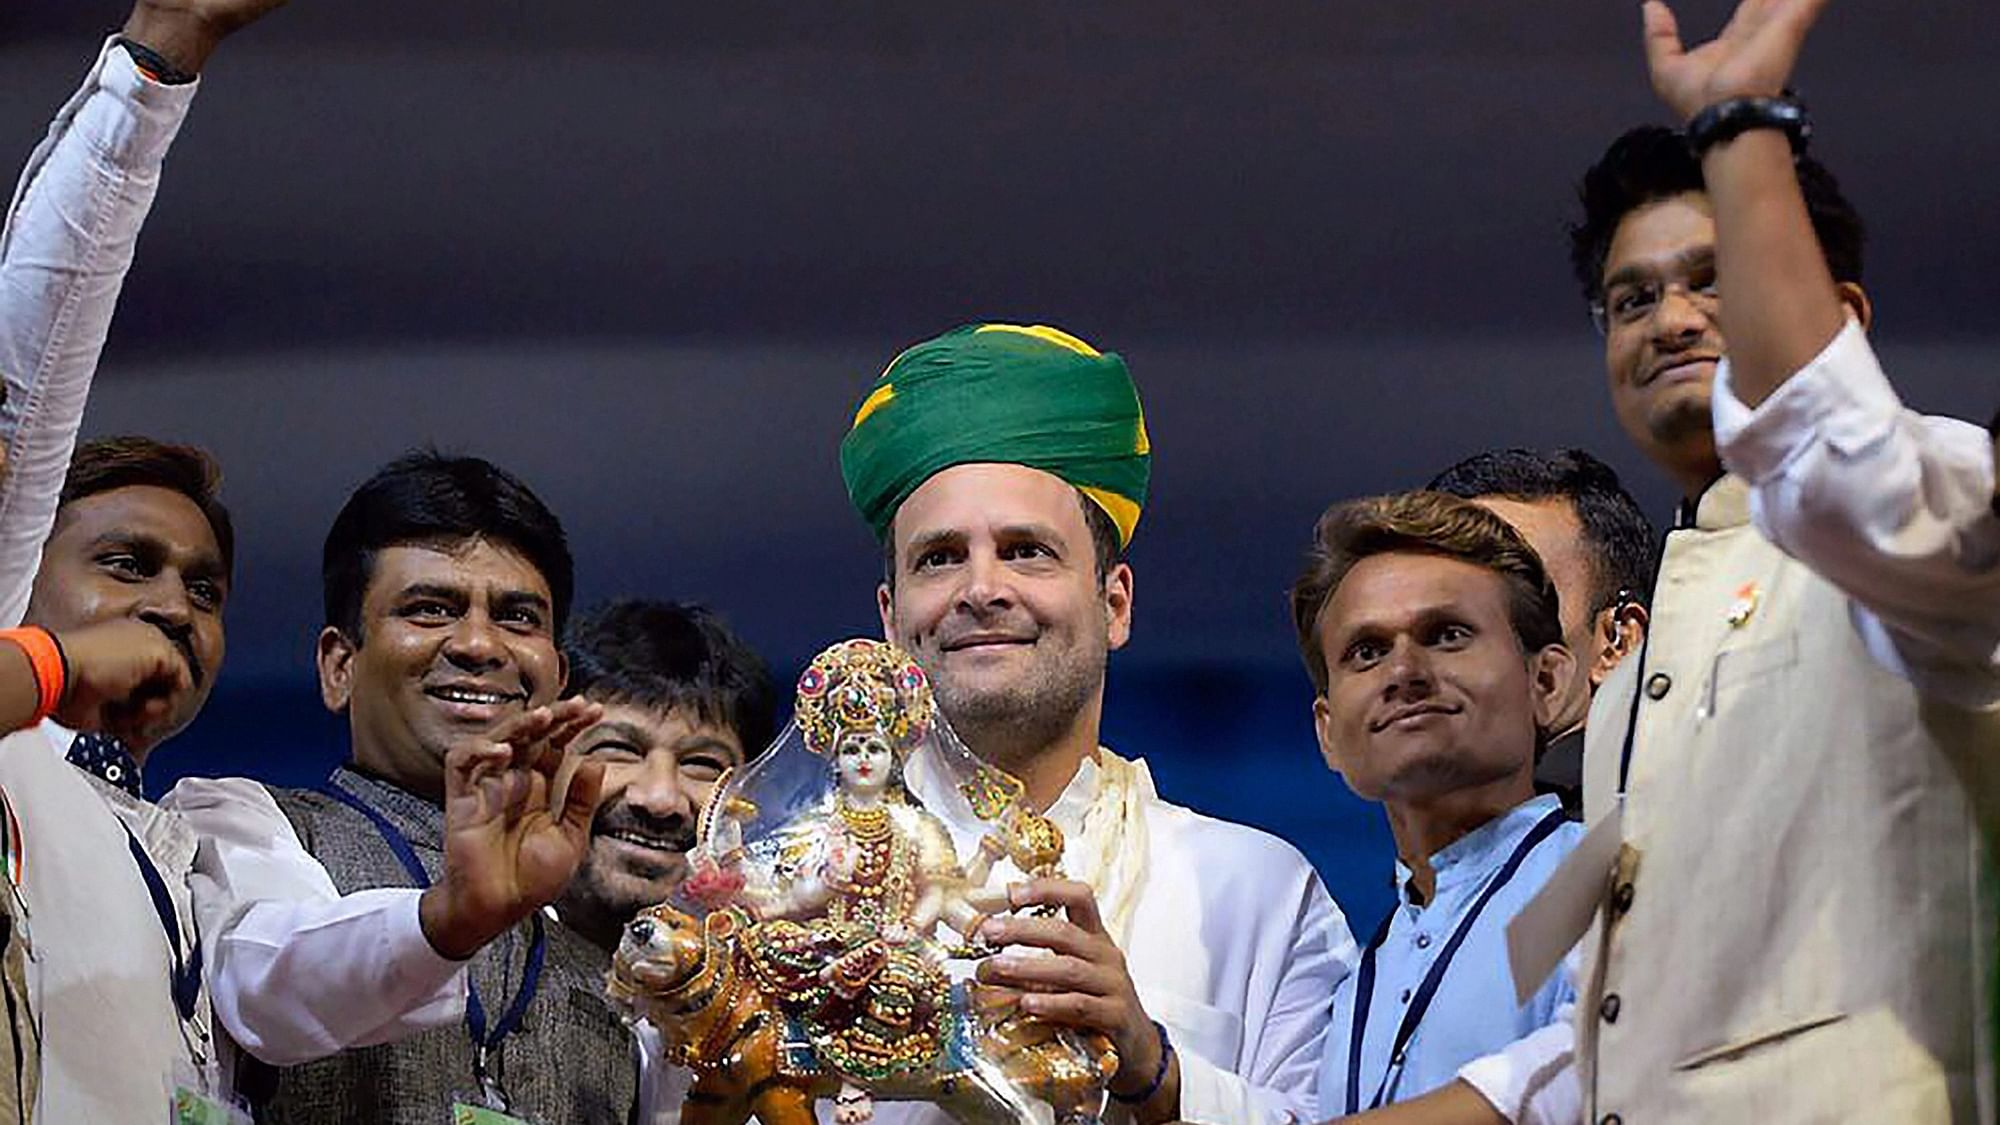 <div class="paragraphs"><p>File Photo: Rahul Gandhi holds a memento of Hindu Goddess Durga presented to him during an election campaign rally in Gandhinagar</p></div>